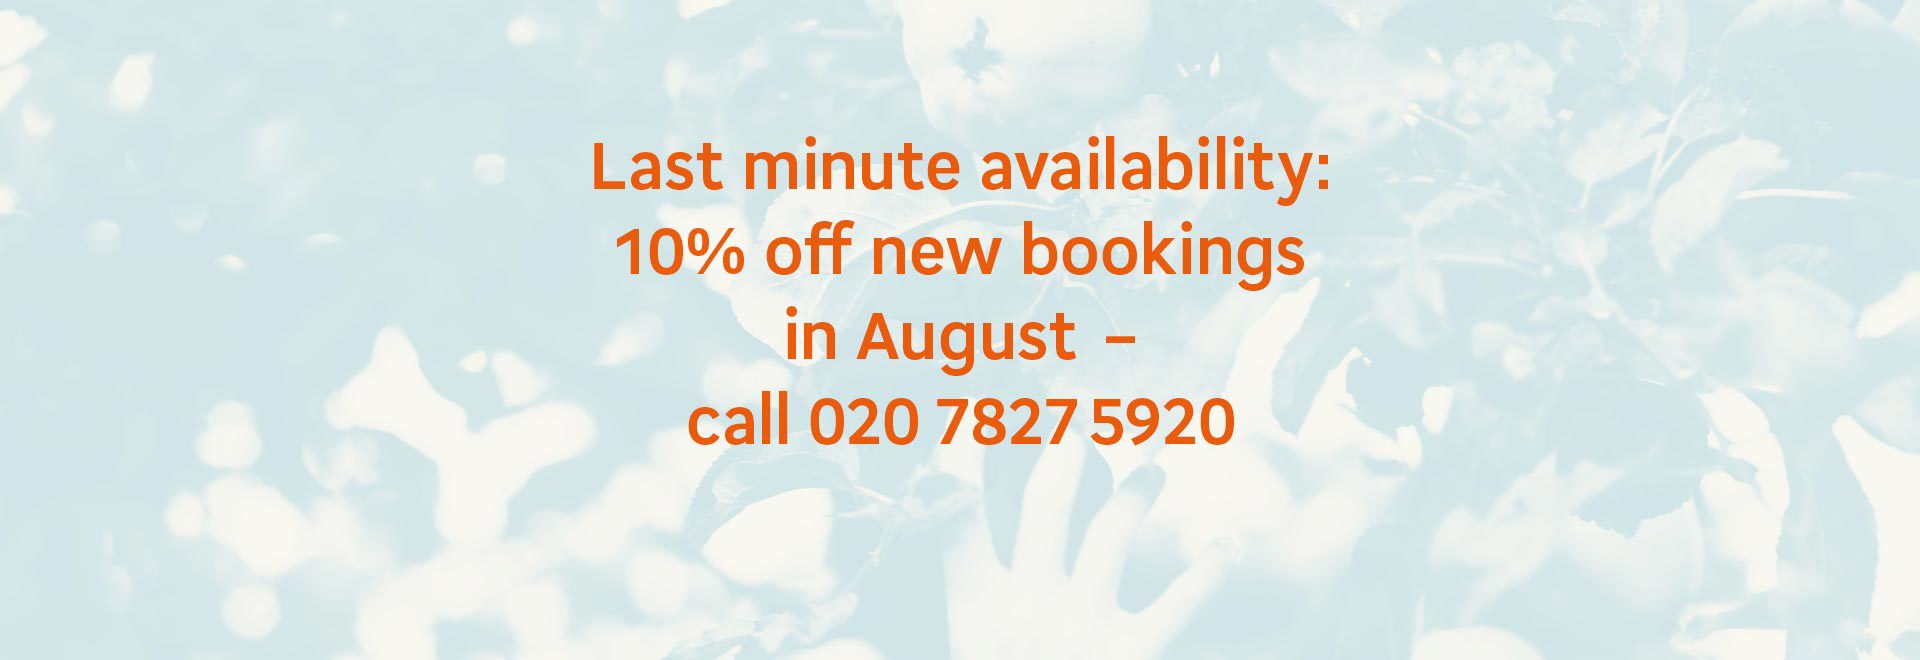 Last minute availability: 10% off new bookings in August - call 020 7827 5920